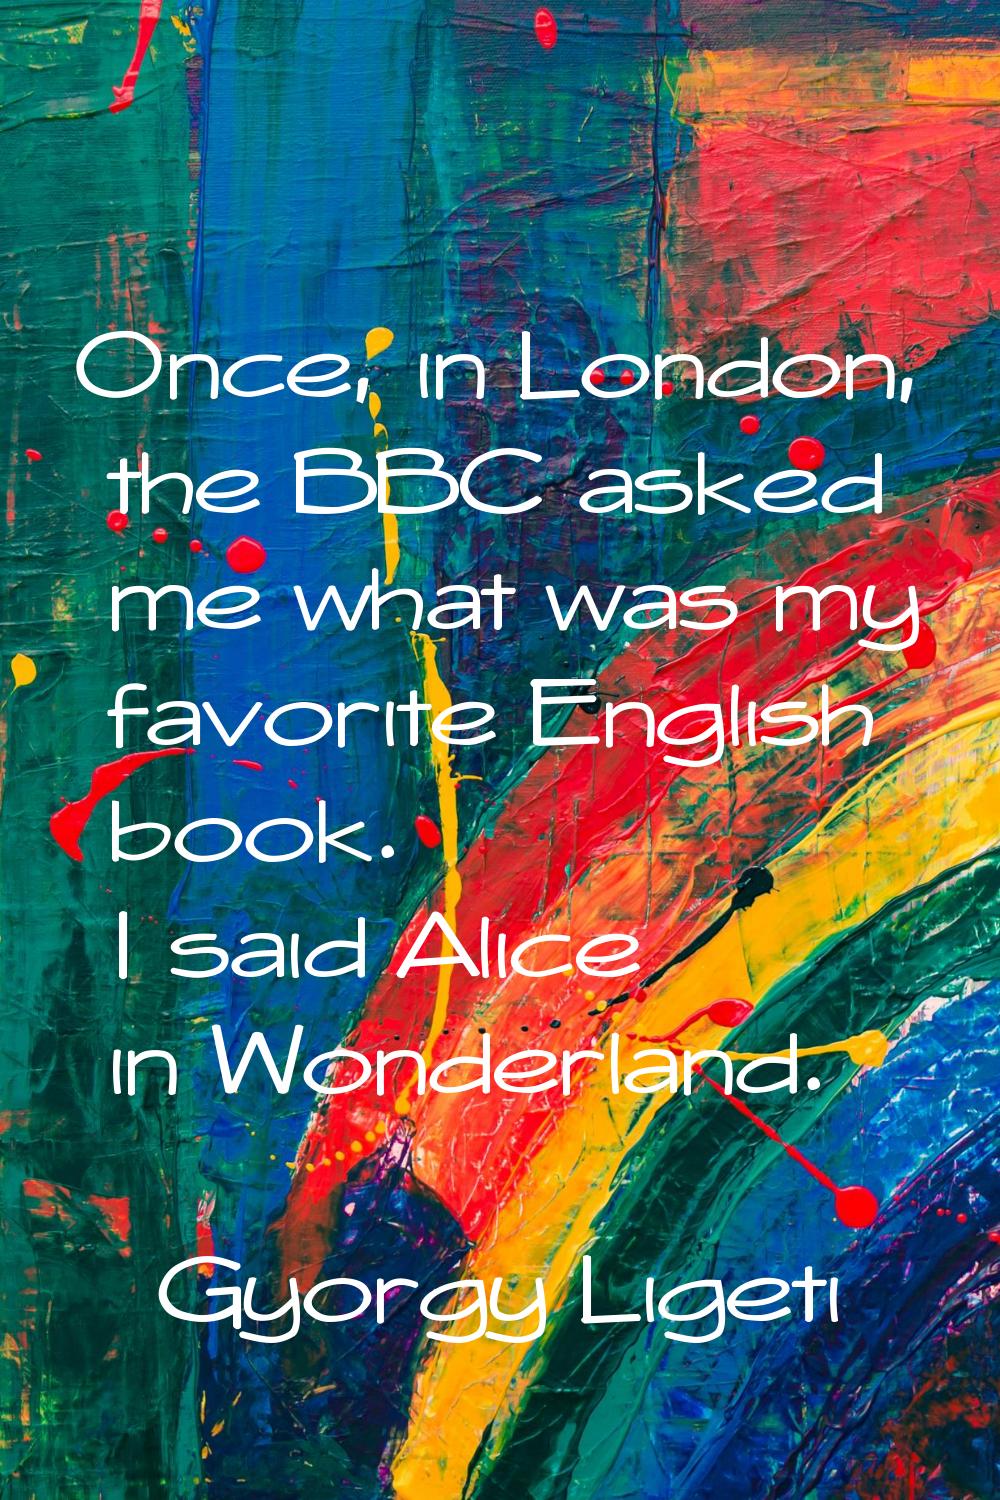 Once, in London, the BBC asked me what was my favorite English book. I said Alice in Wonderland.